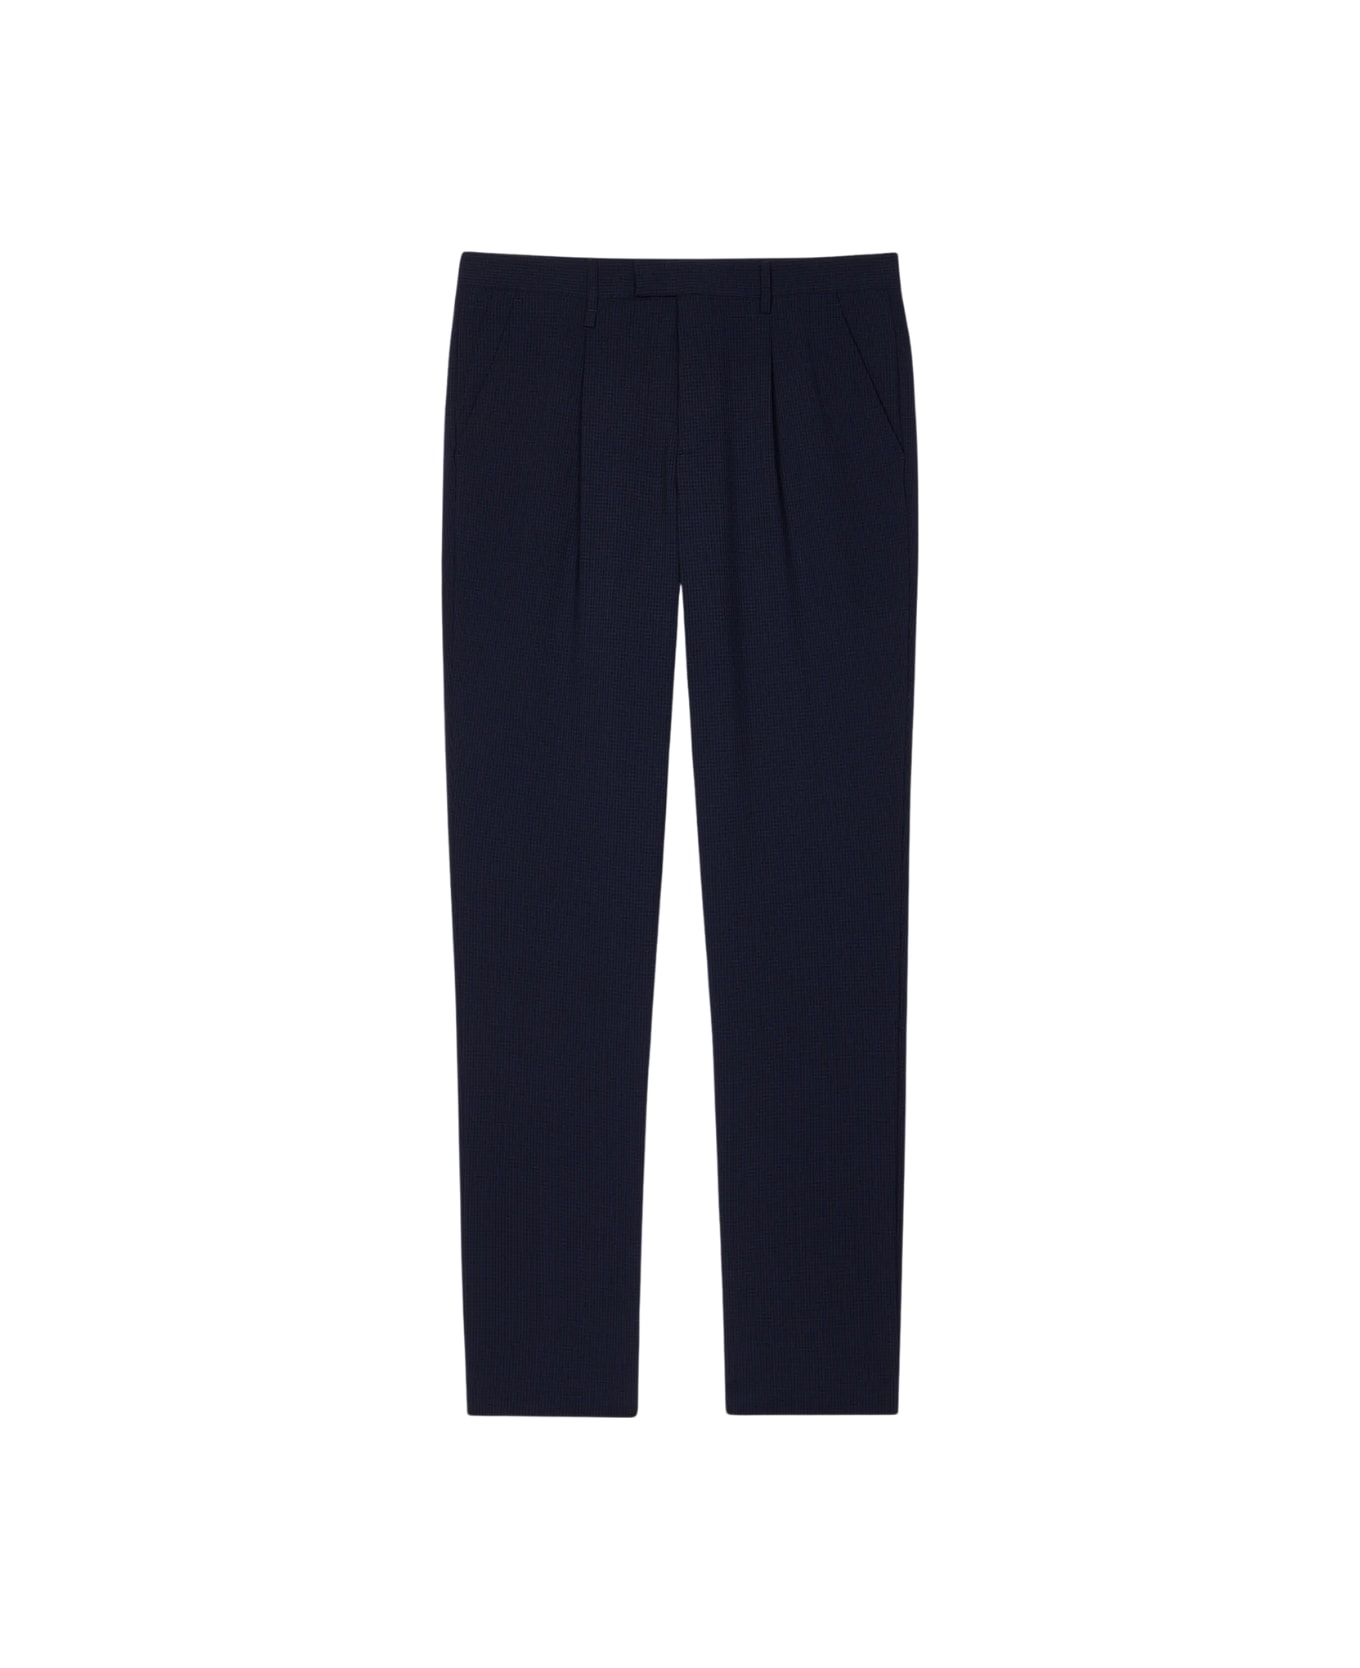 PS by Paul Smith Mens Trouser - Blues ボトムス